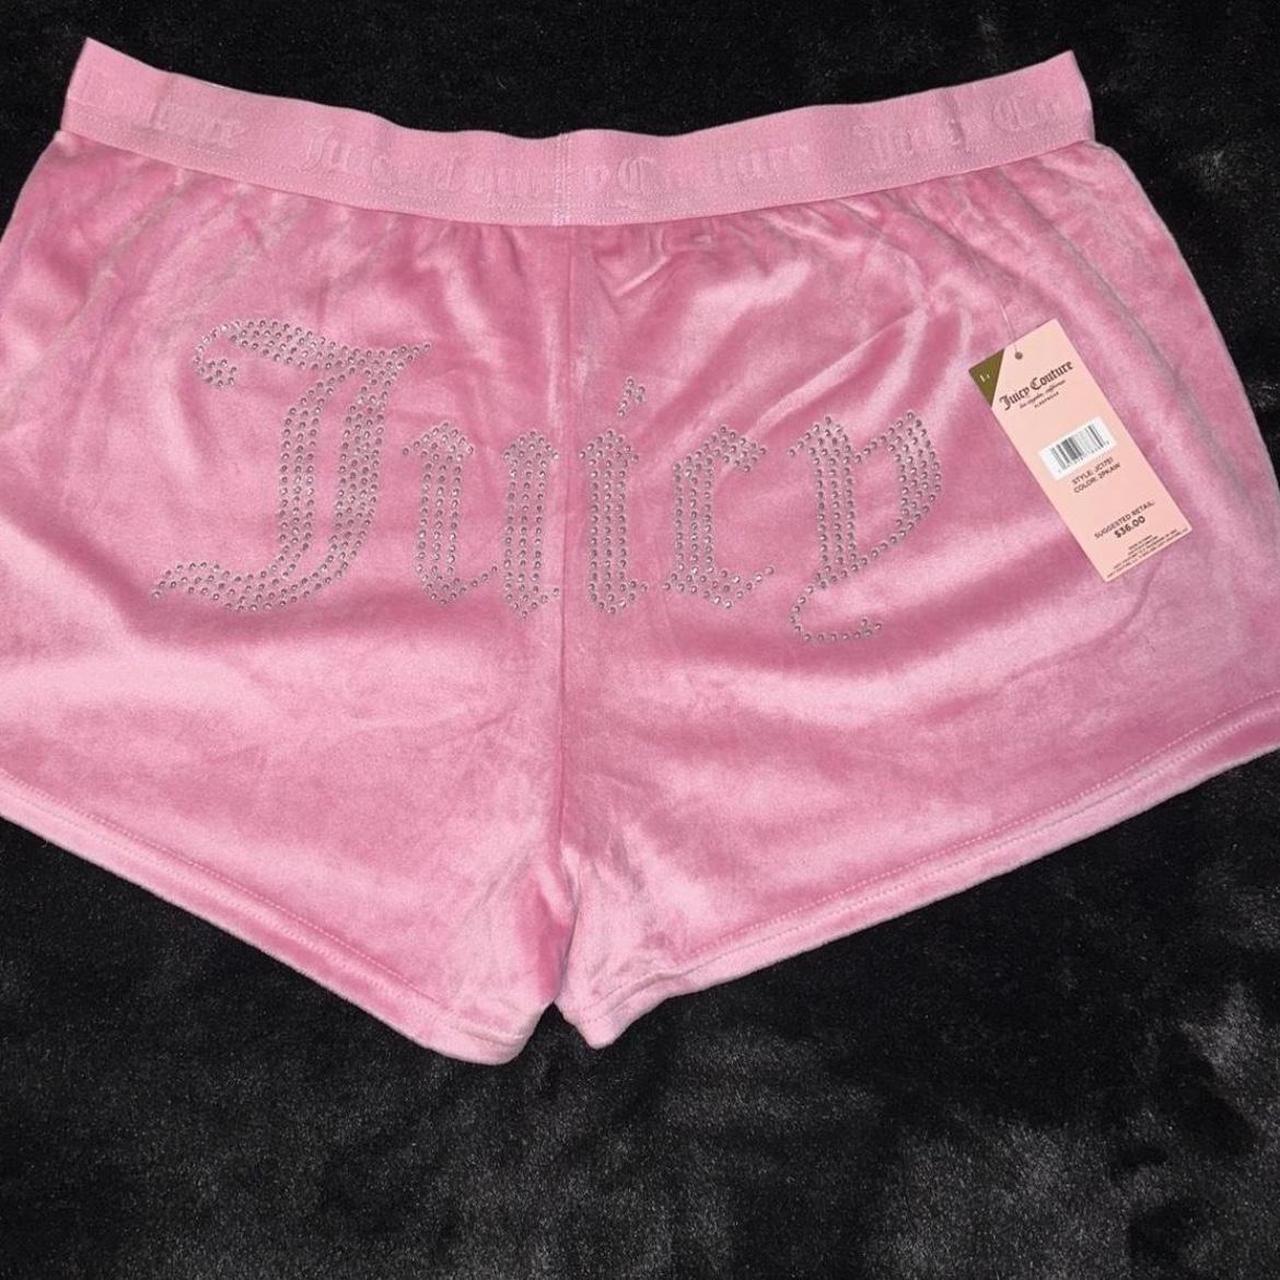 Juicy Couture, Intimates & Sleepwear, Juicy Couture